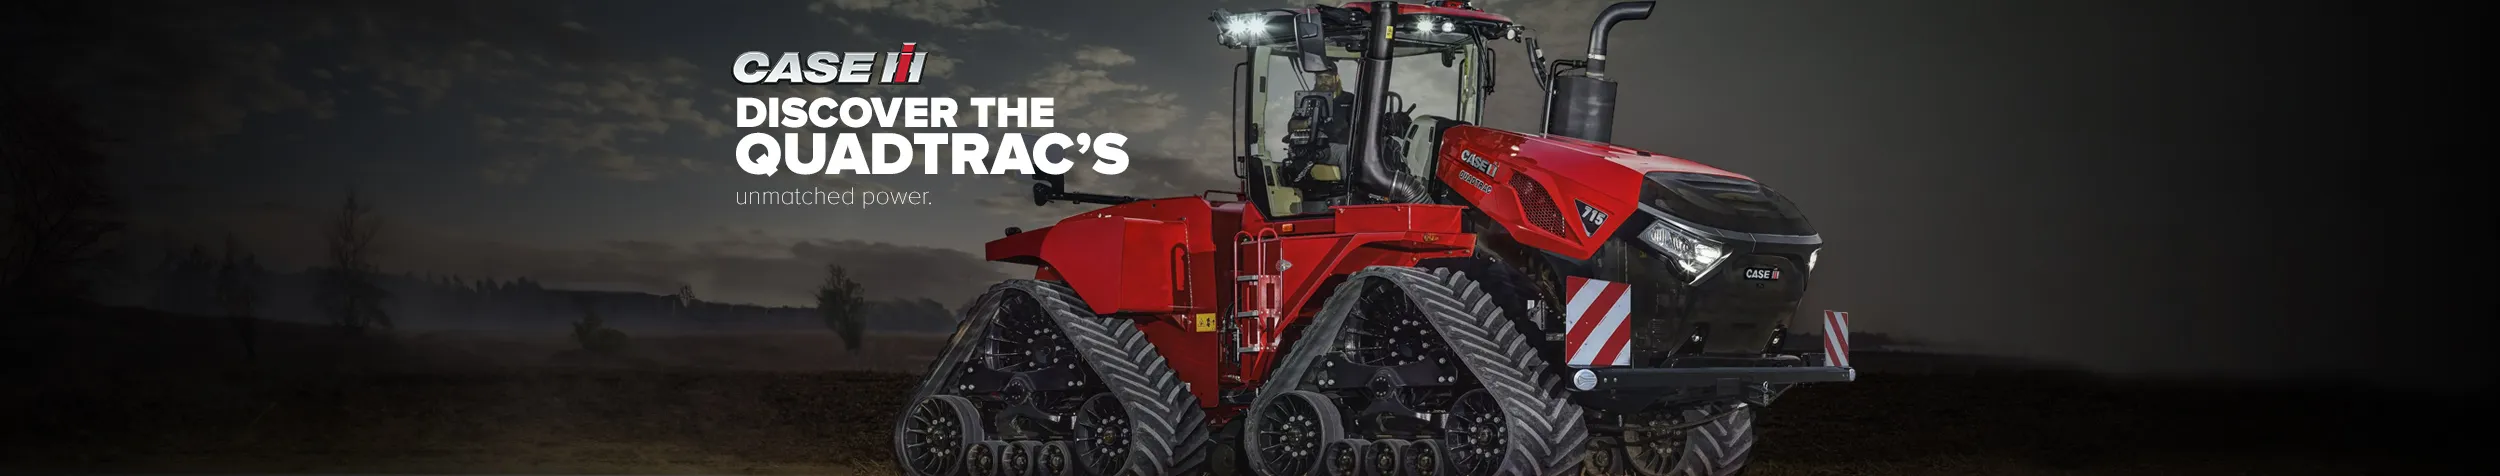 Discover the Quadtrac’s unmatched power.